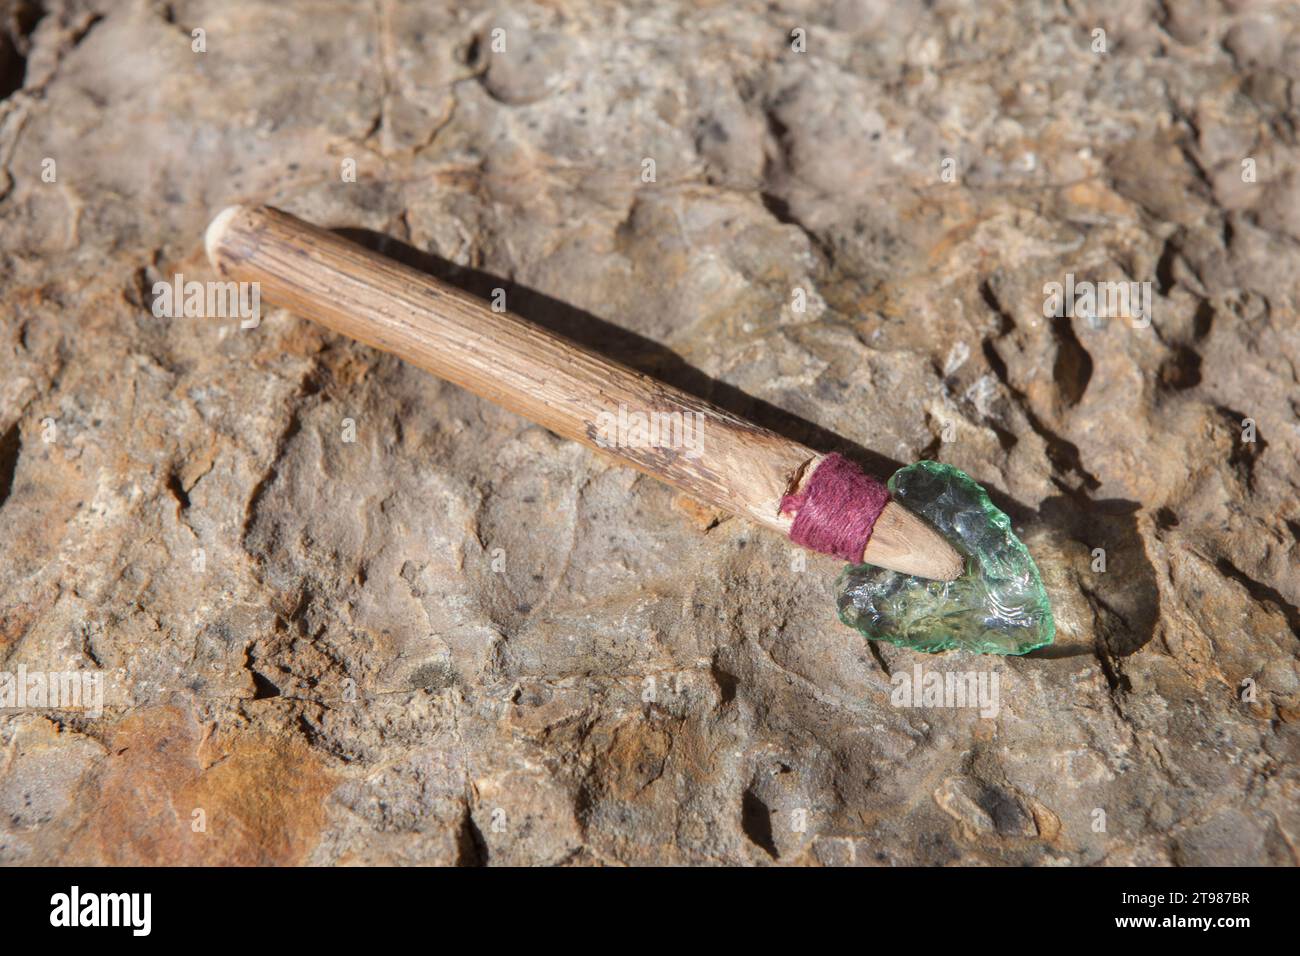 Prehistorical arrowhead built in short shaft. Replica made of glass for educational purposes Stock Photo